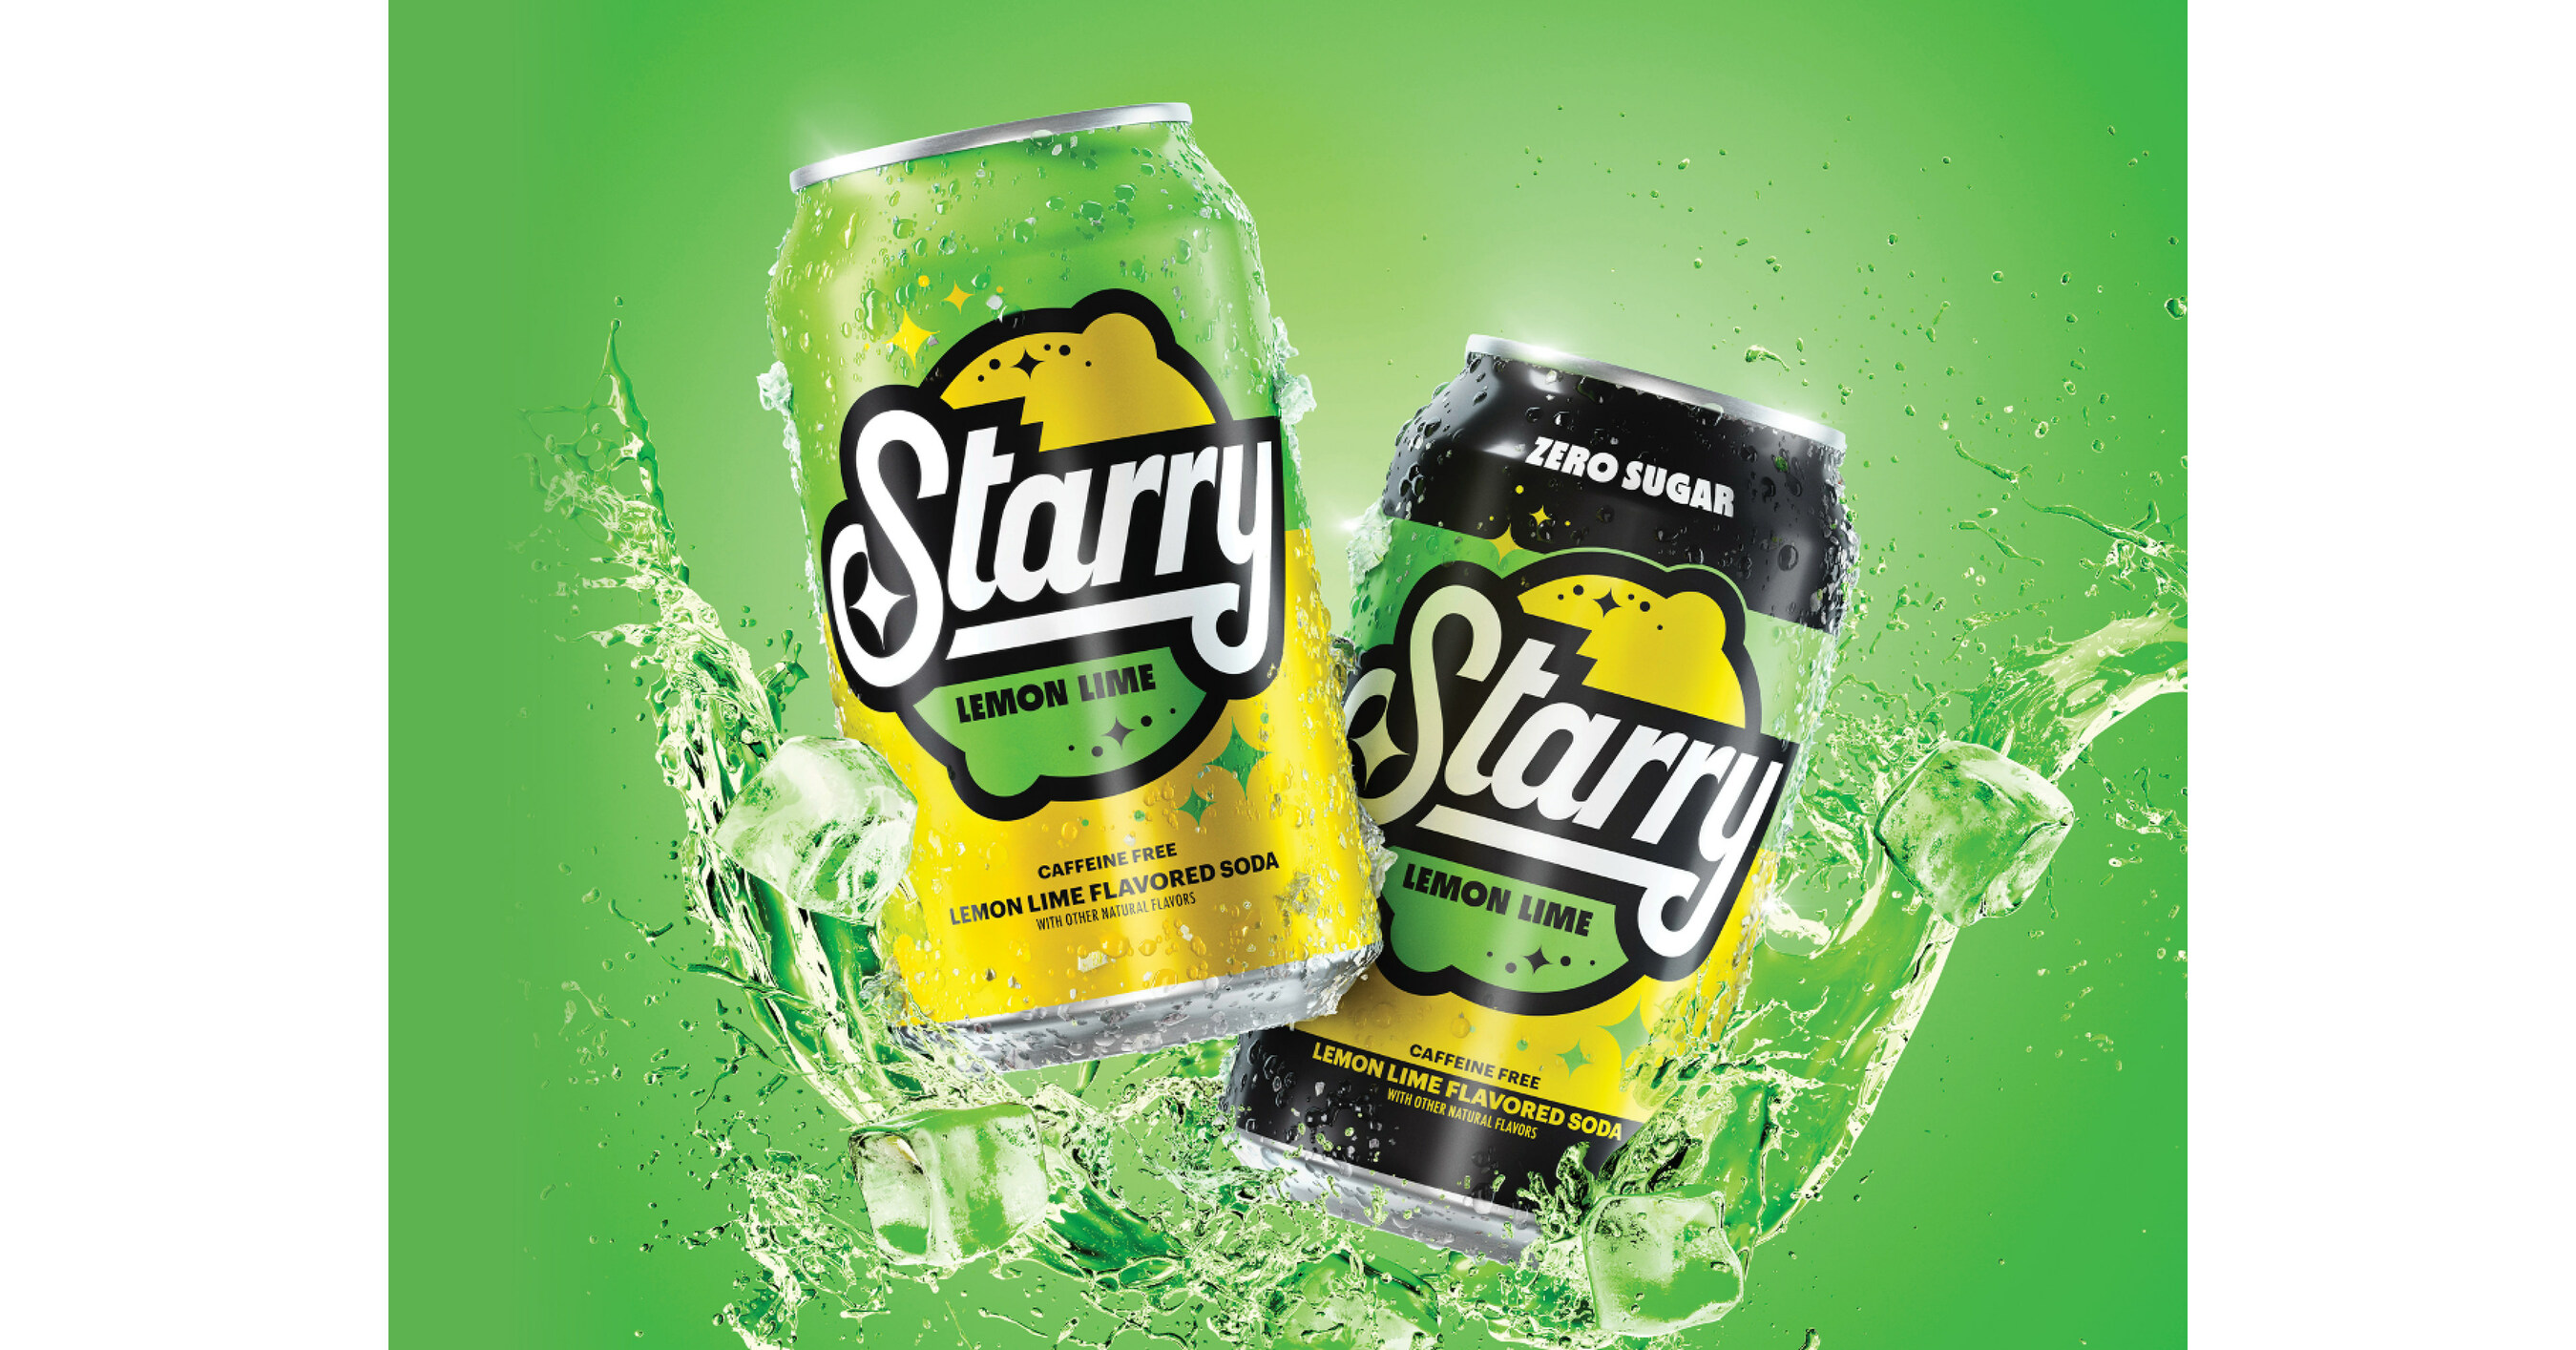 STARRY™ Makes Its Debut - a Crisp, Clear, Refreshing Lemon Lime Flavored  Soda for a Generation of Irreverent Optimists